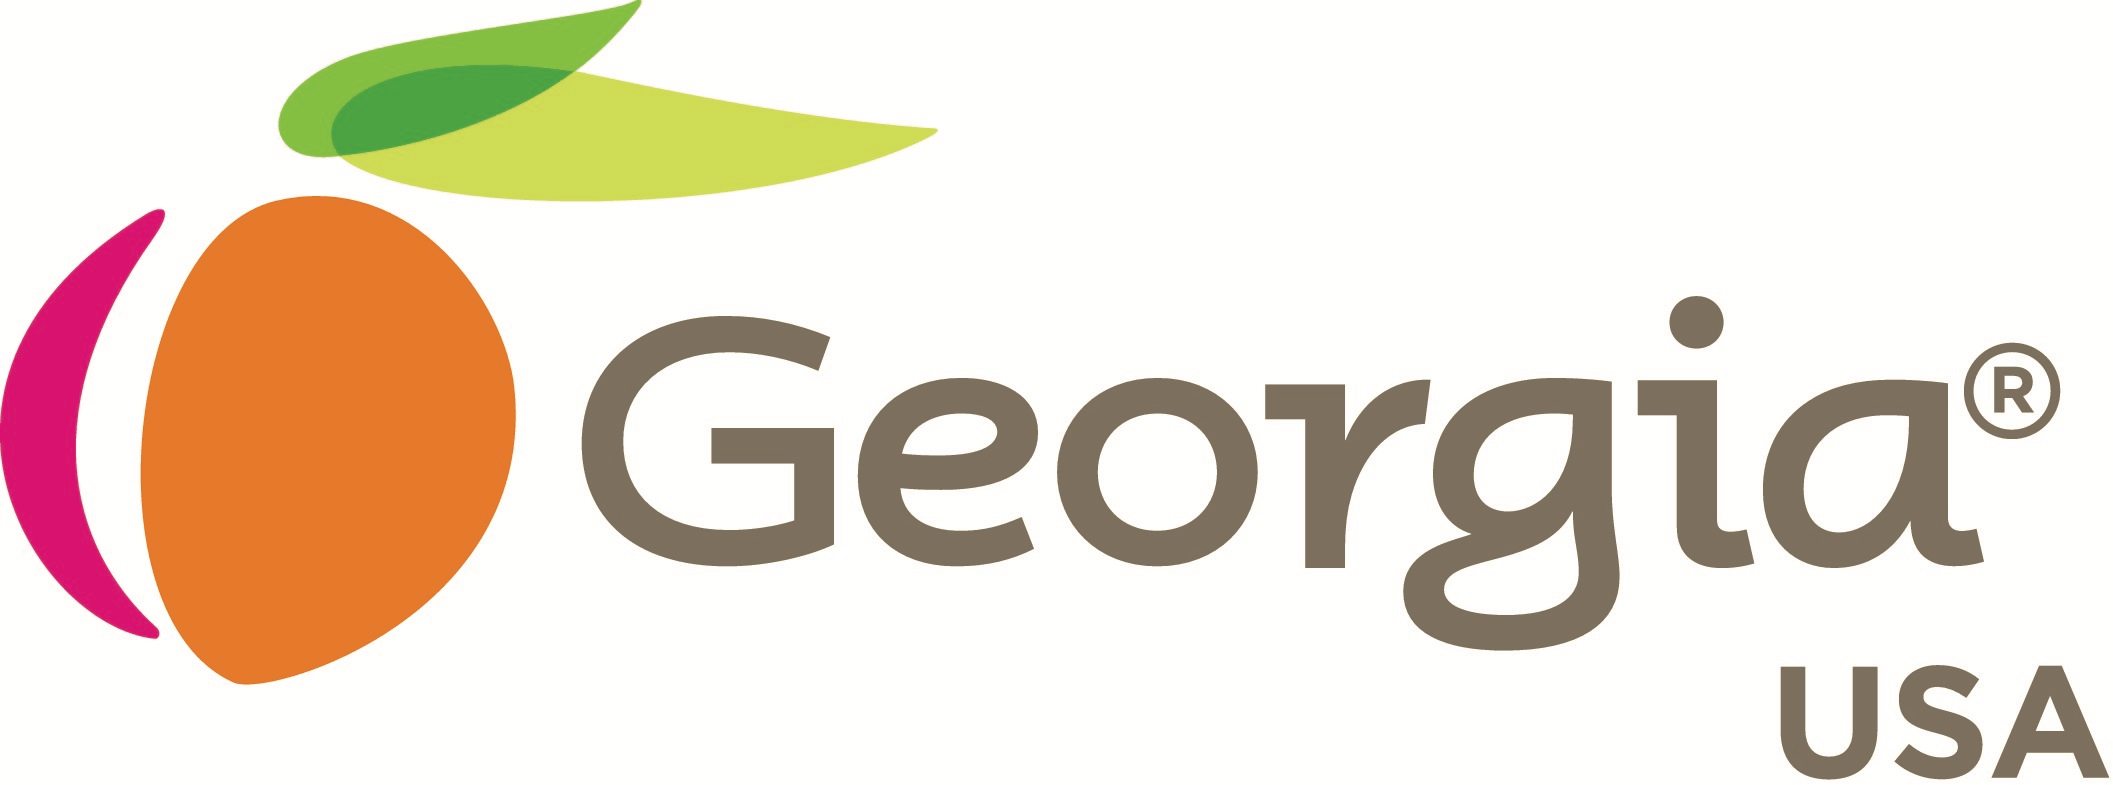 USA Georgia Logo - Georgia Centers for Innovation Logo.png. Institute for People